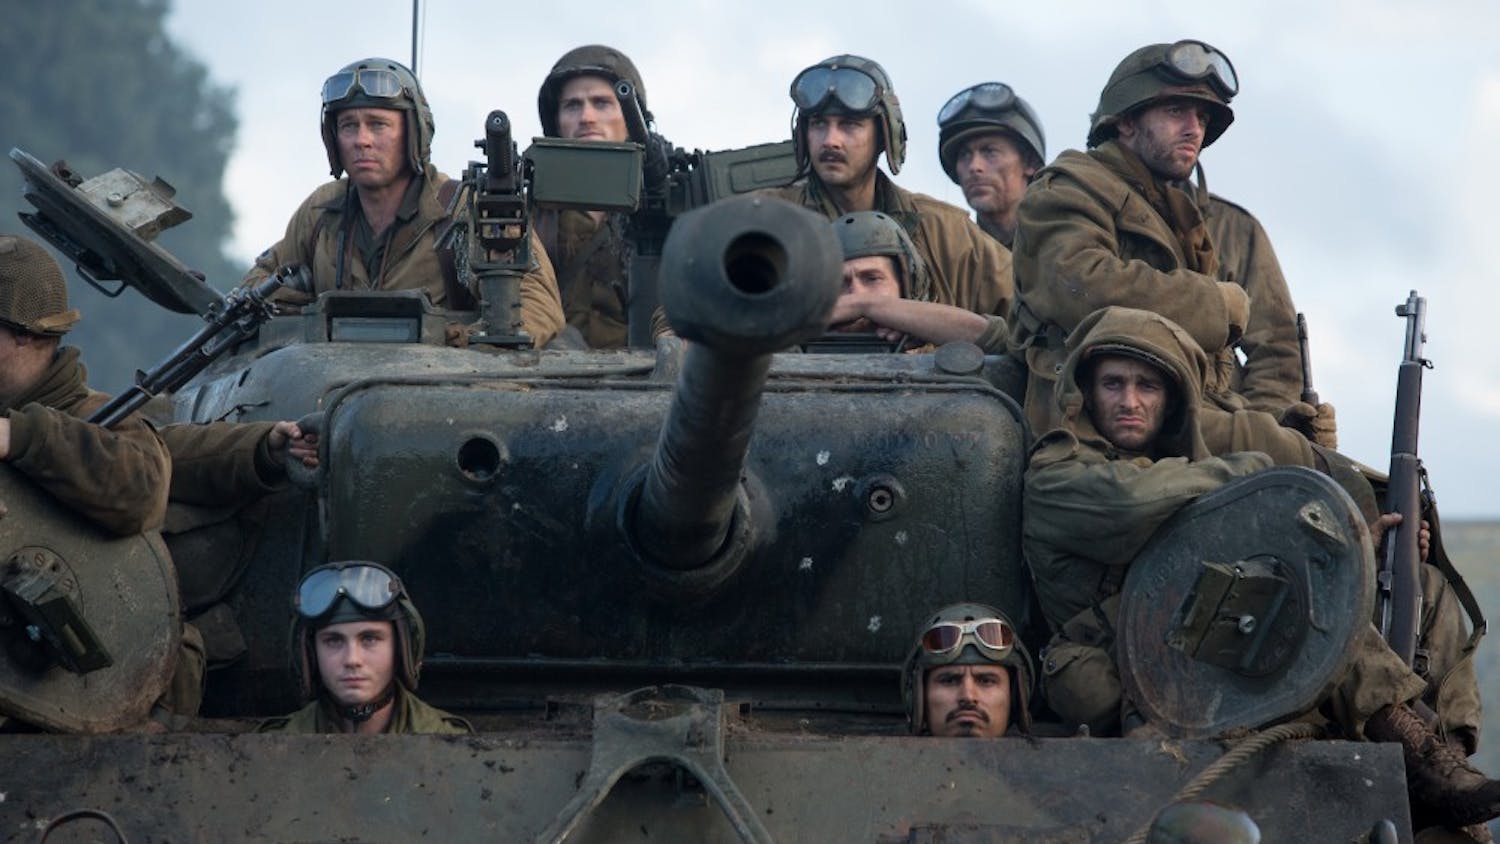 ENTER FURY-MOVIE-REVIEW 4 MCT